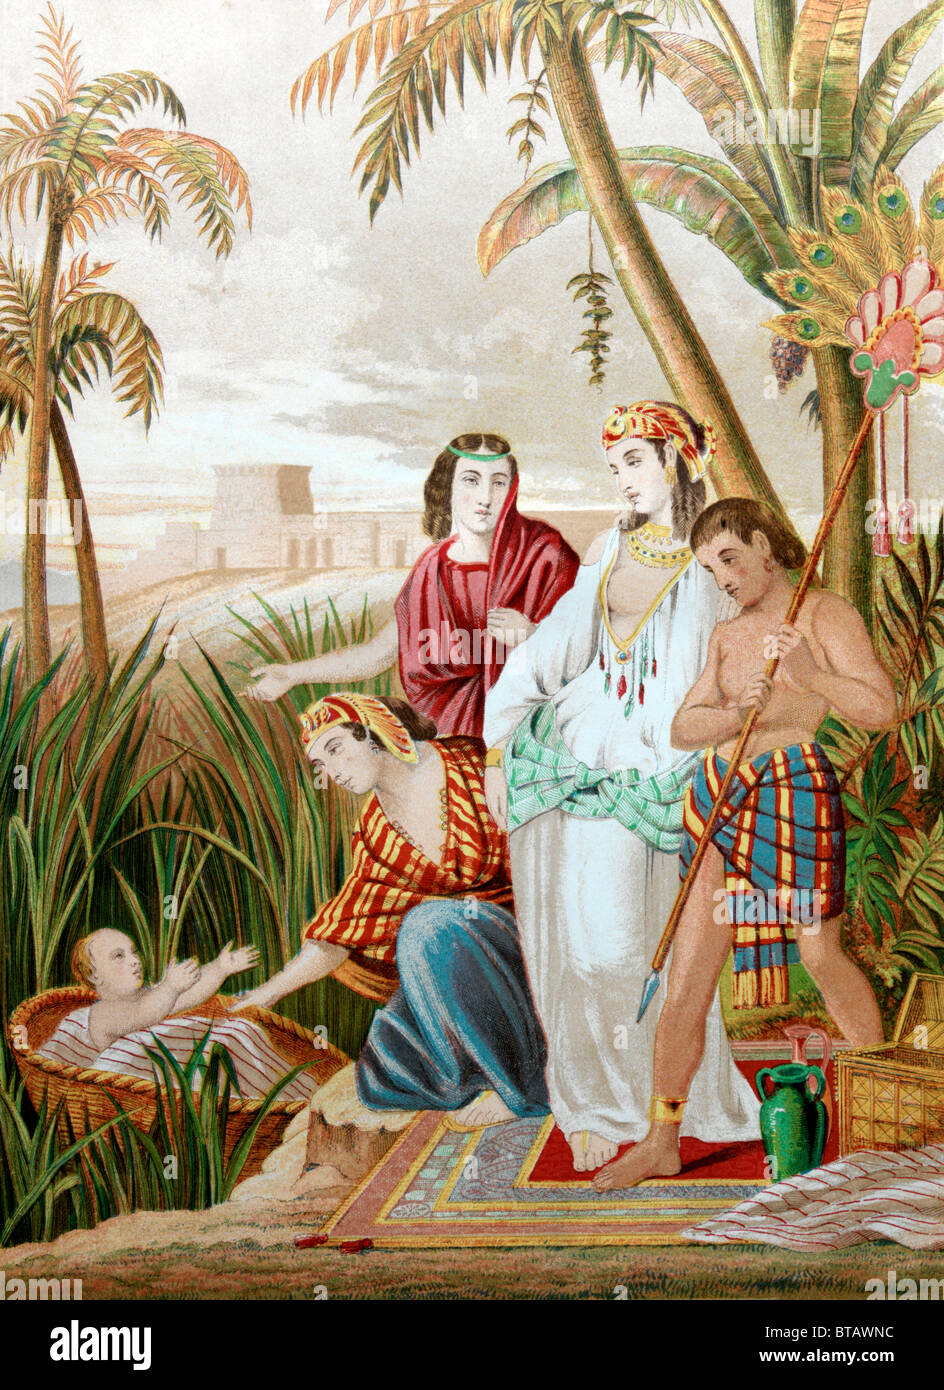 Painting Of Baby Moses Found By The Pharoah's Daughter In The Bulrushes Stock Photo